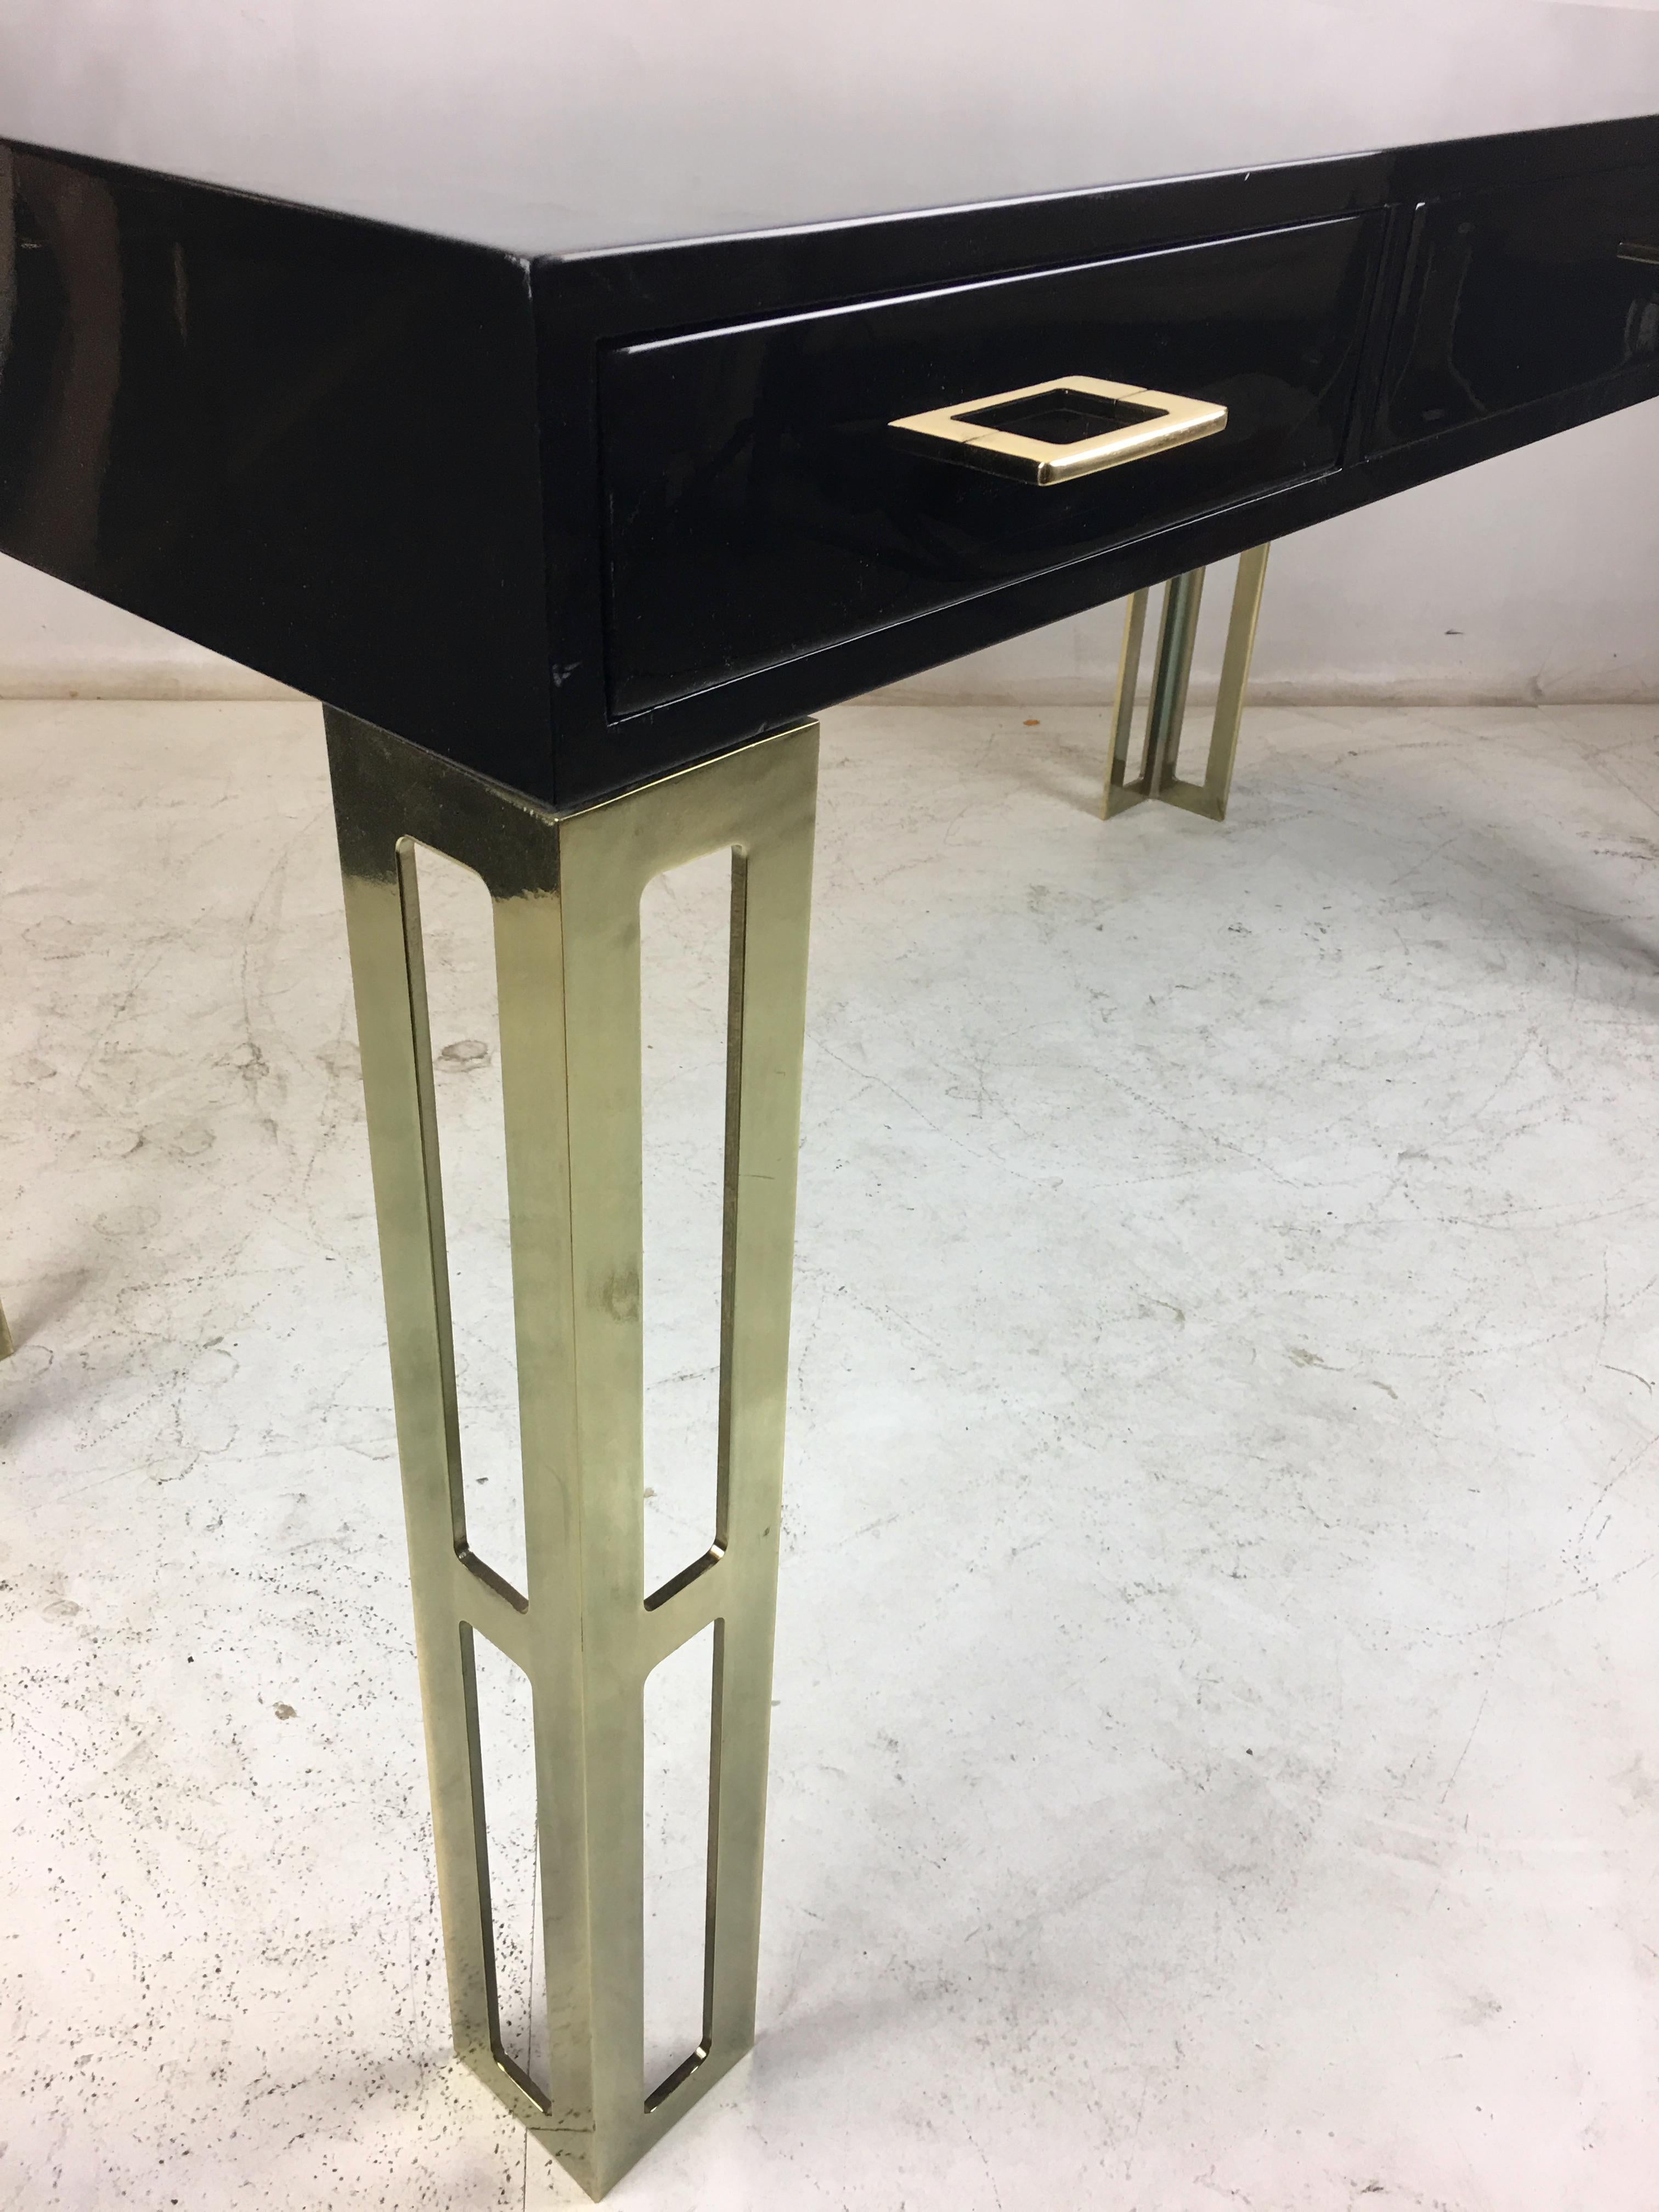 Black Lacquer Writing Table with Brass Legs and Hardware 1